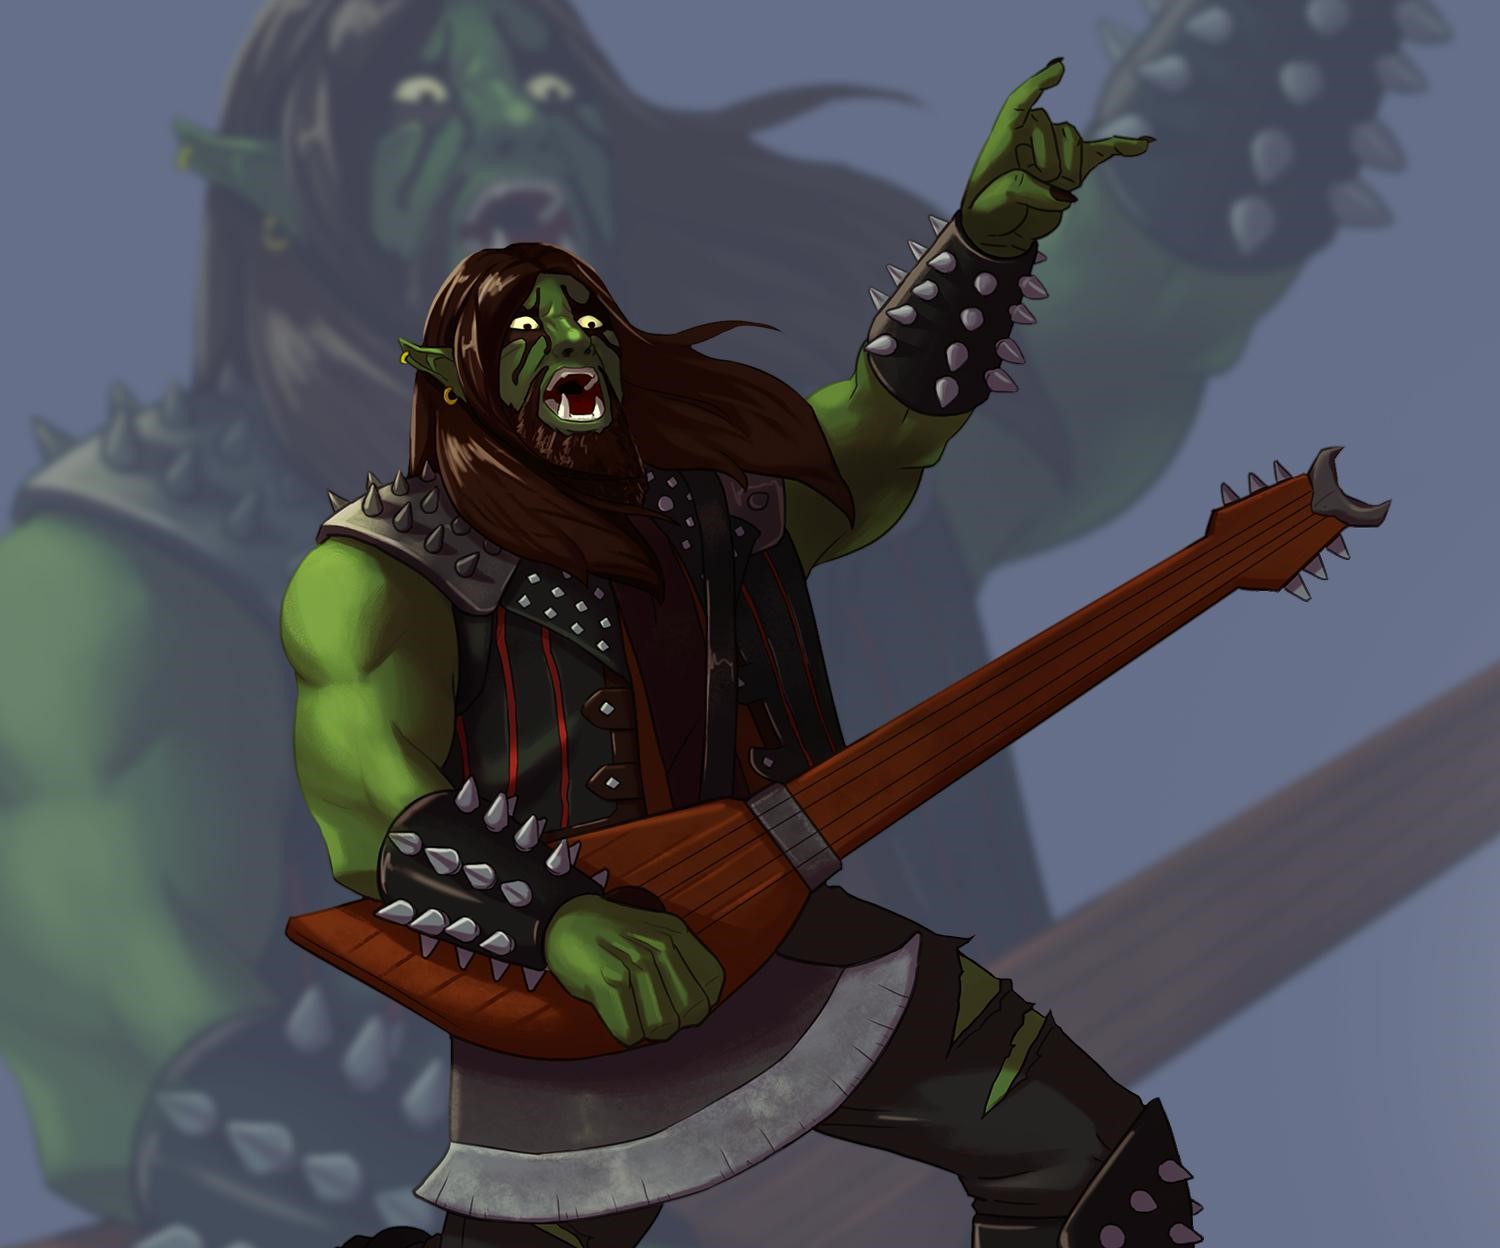 Unleash The Power Of The Orc Bard In D&D - Uncover The Surprising Benefits!